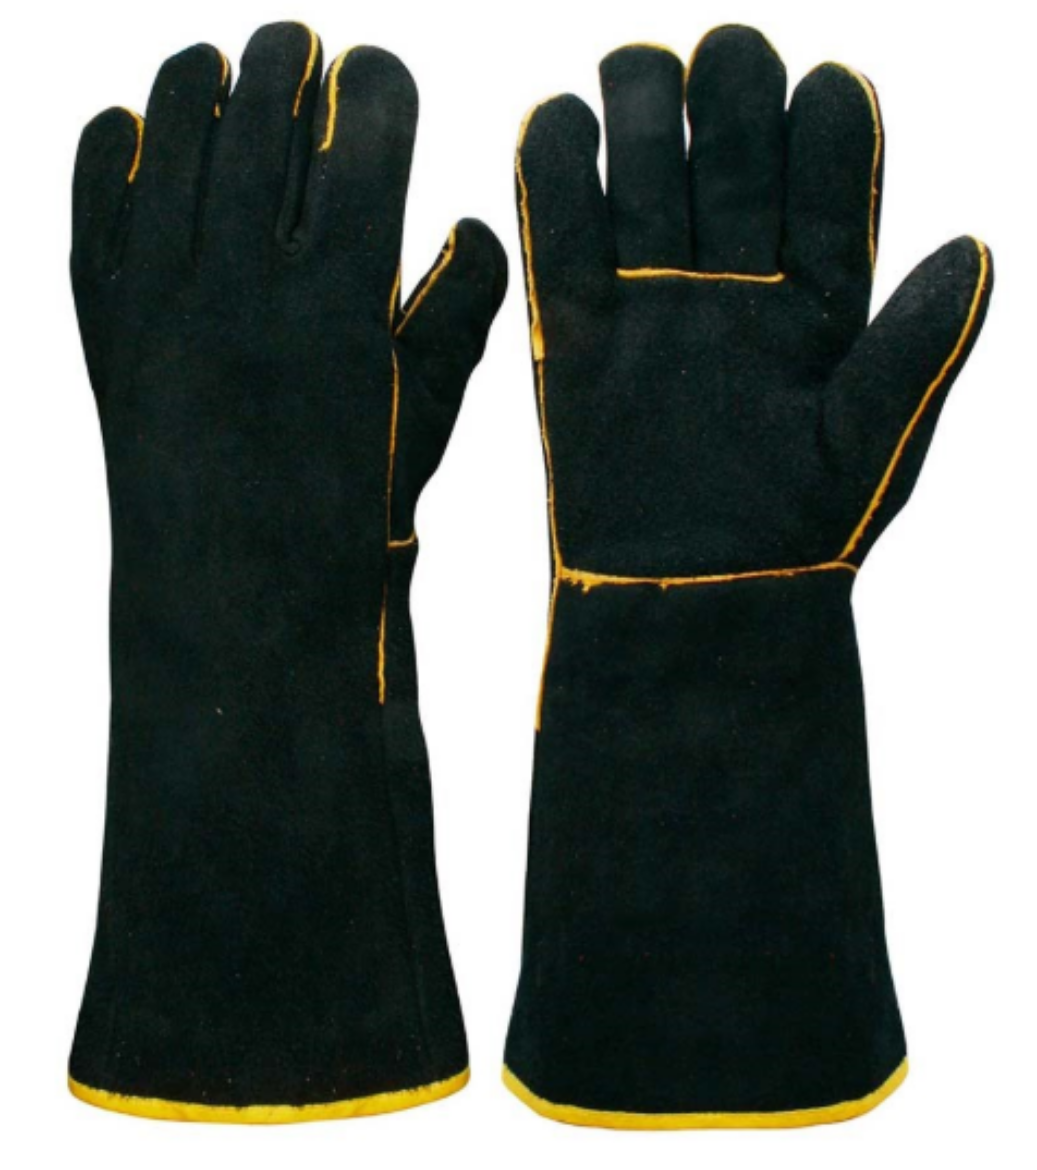 Picture of Gauntlet Black Gold Welding Glove Black Gold One Size Fits All